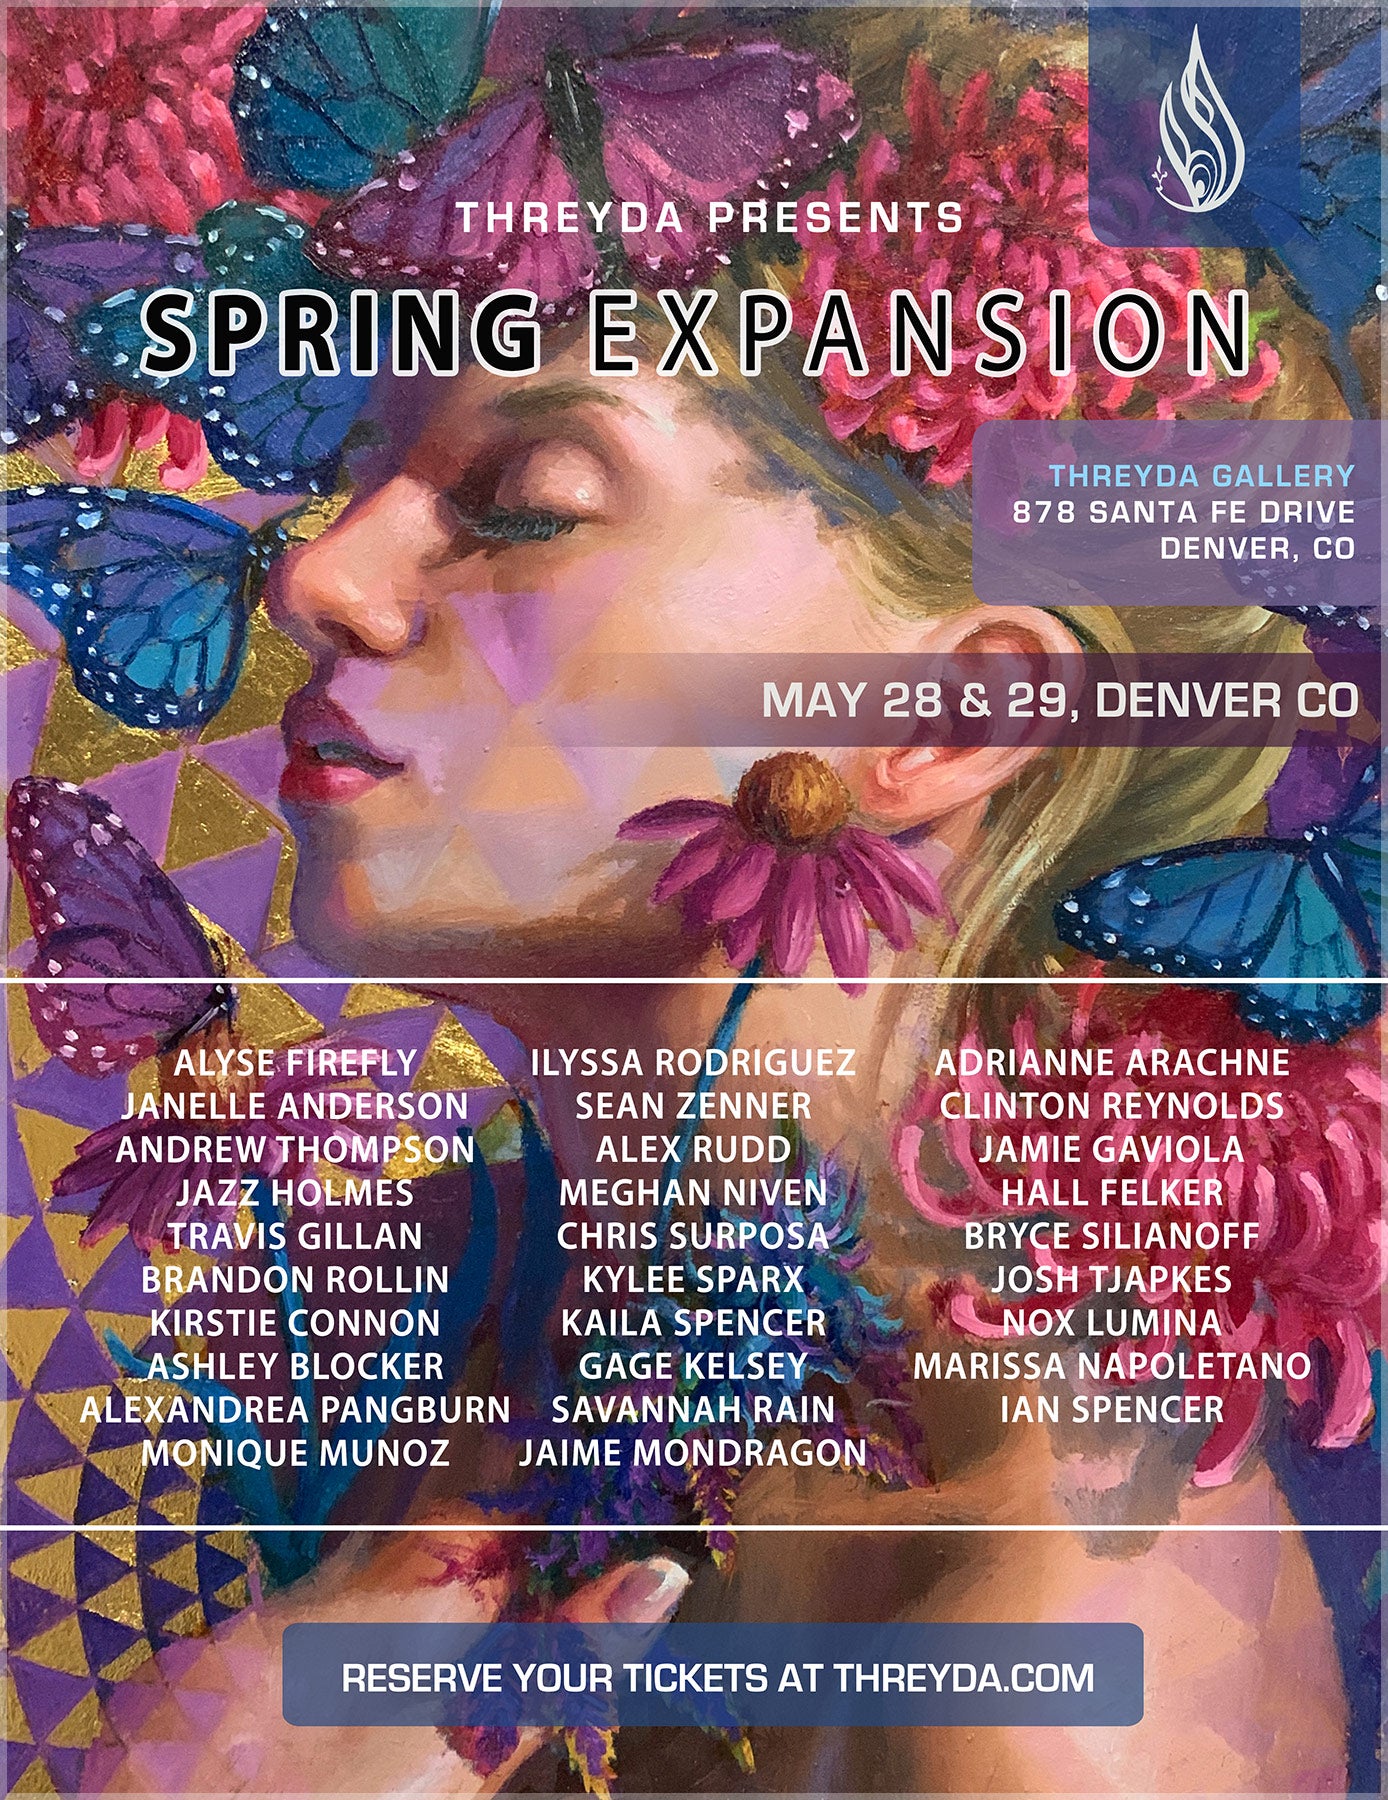 Spring Expansion Gallery Show - May 28th and 29th